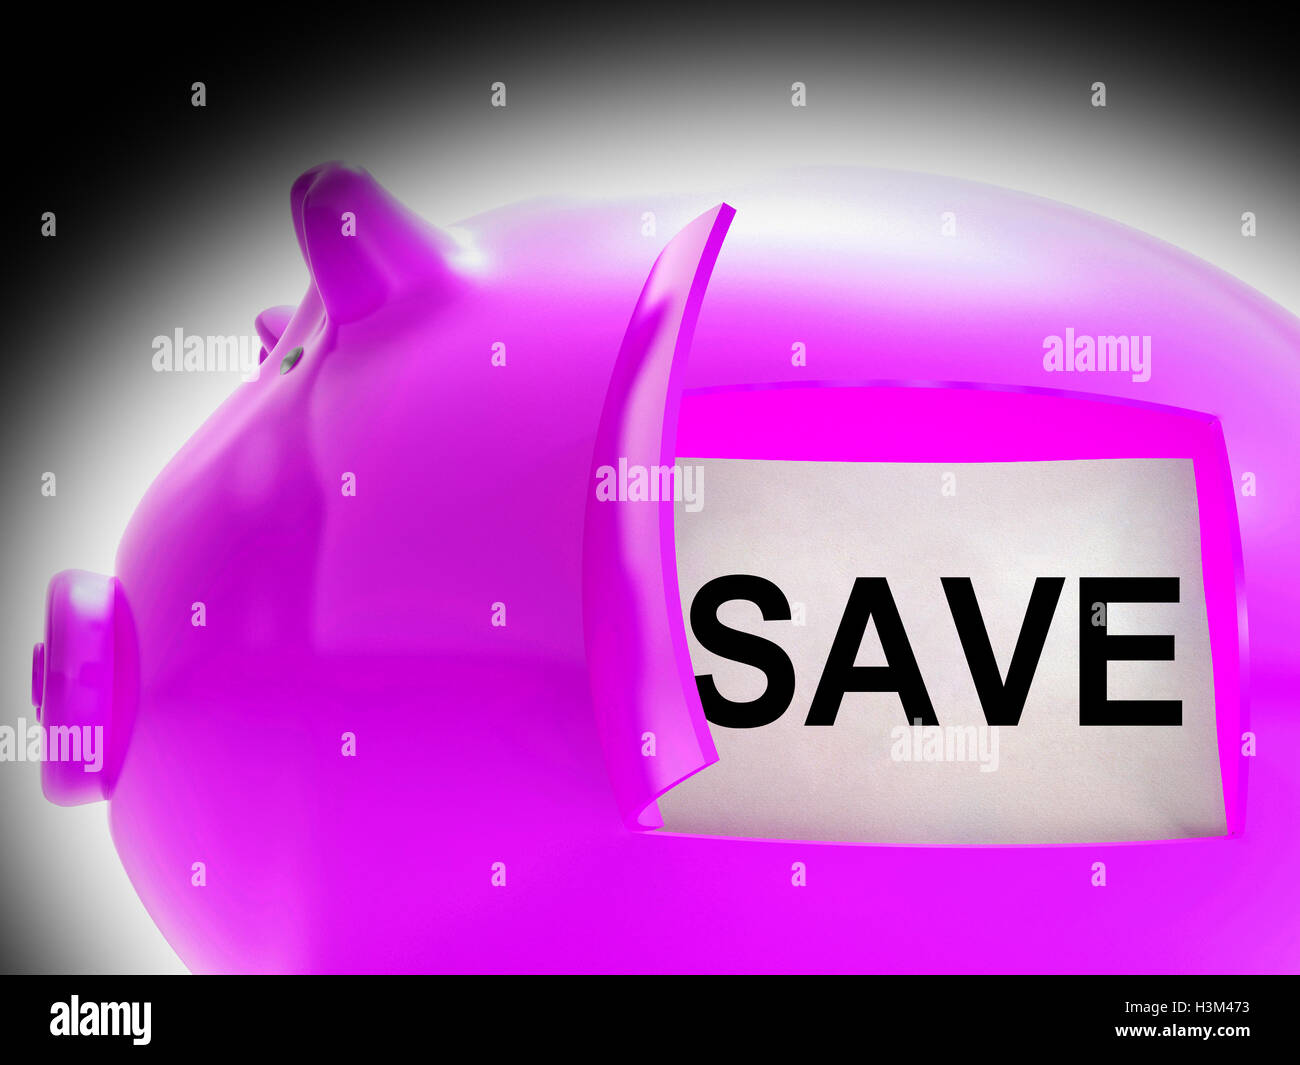 Save Piggy Bank Message Shows Savings On Products Stock Photo